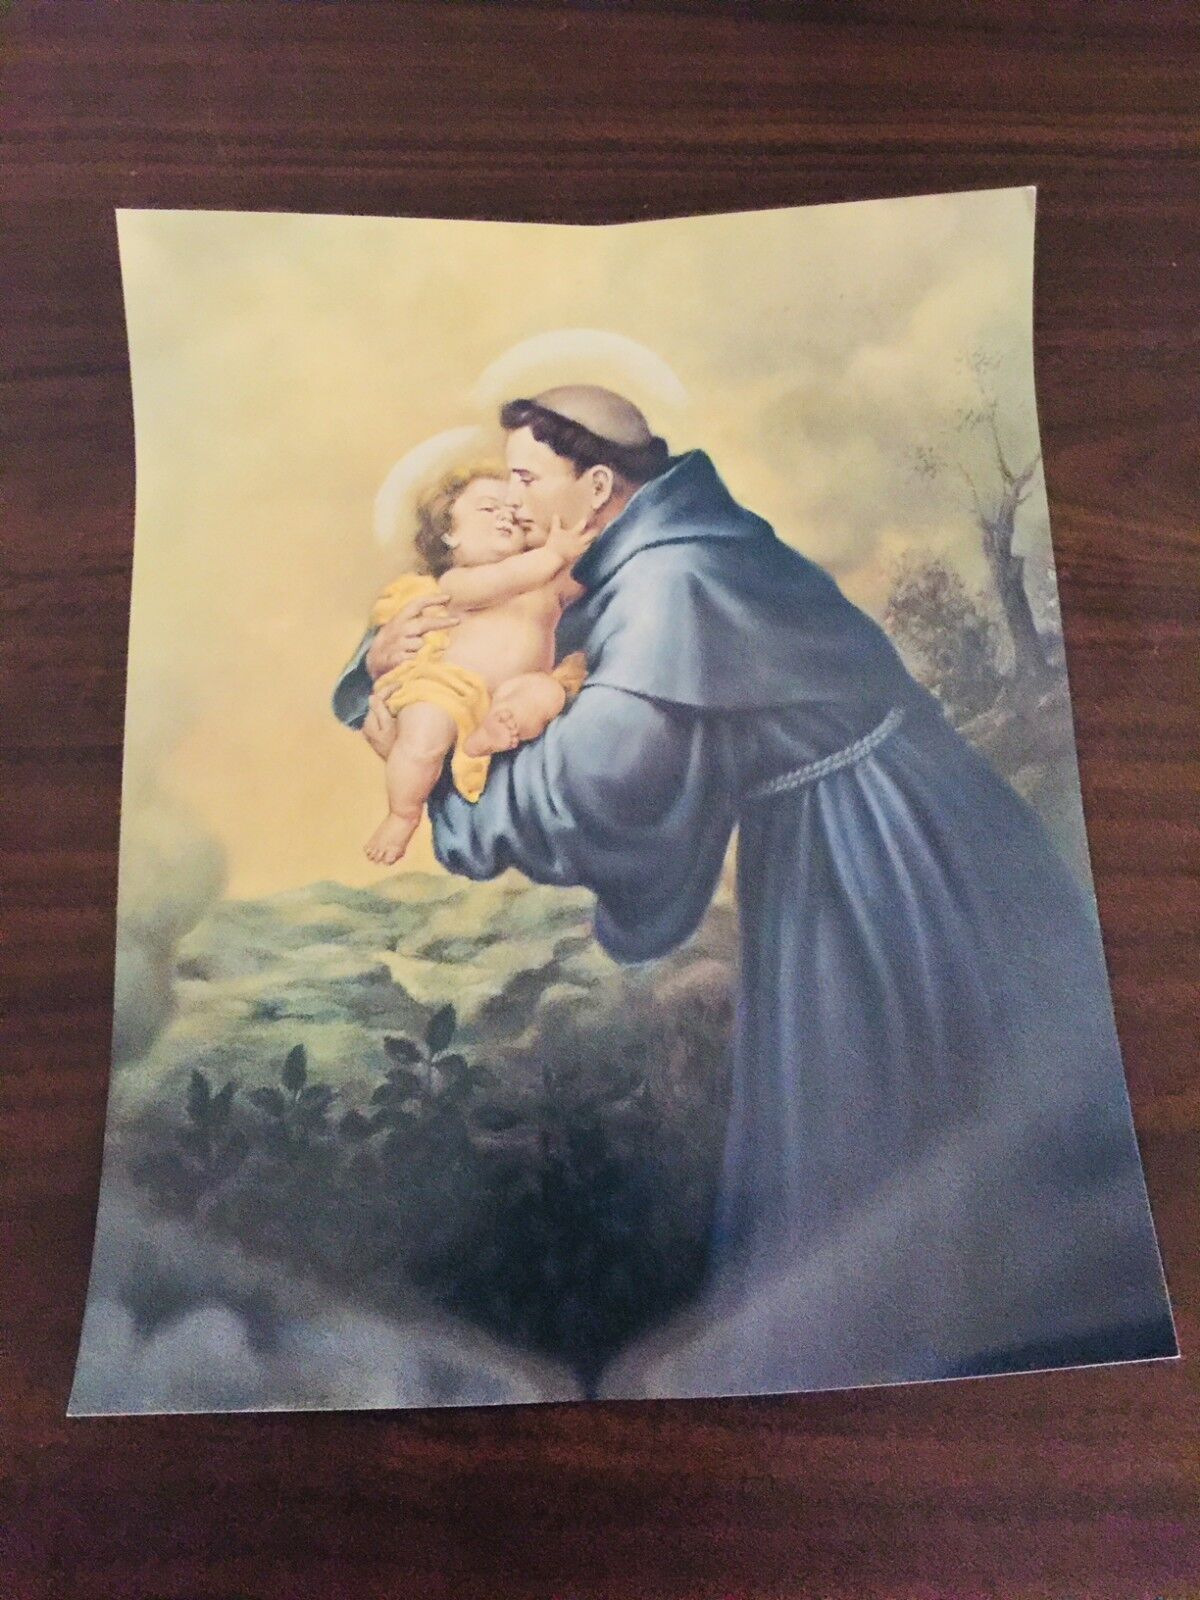 Saint Anthony of Padua Image 7" X 5", New From Italy - Bob and Penny Lord